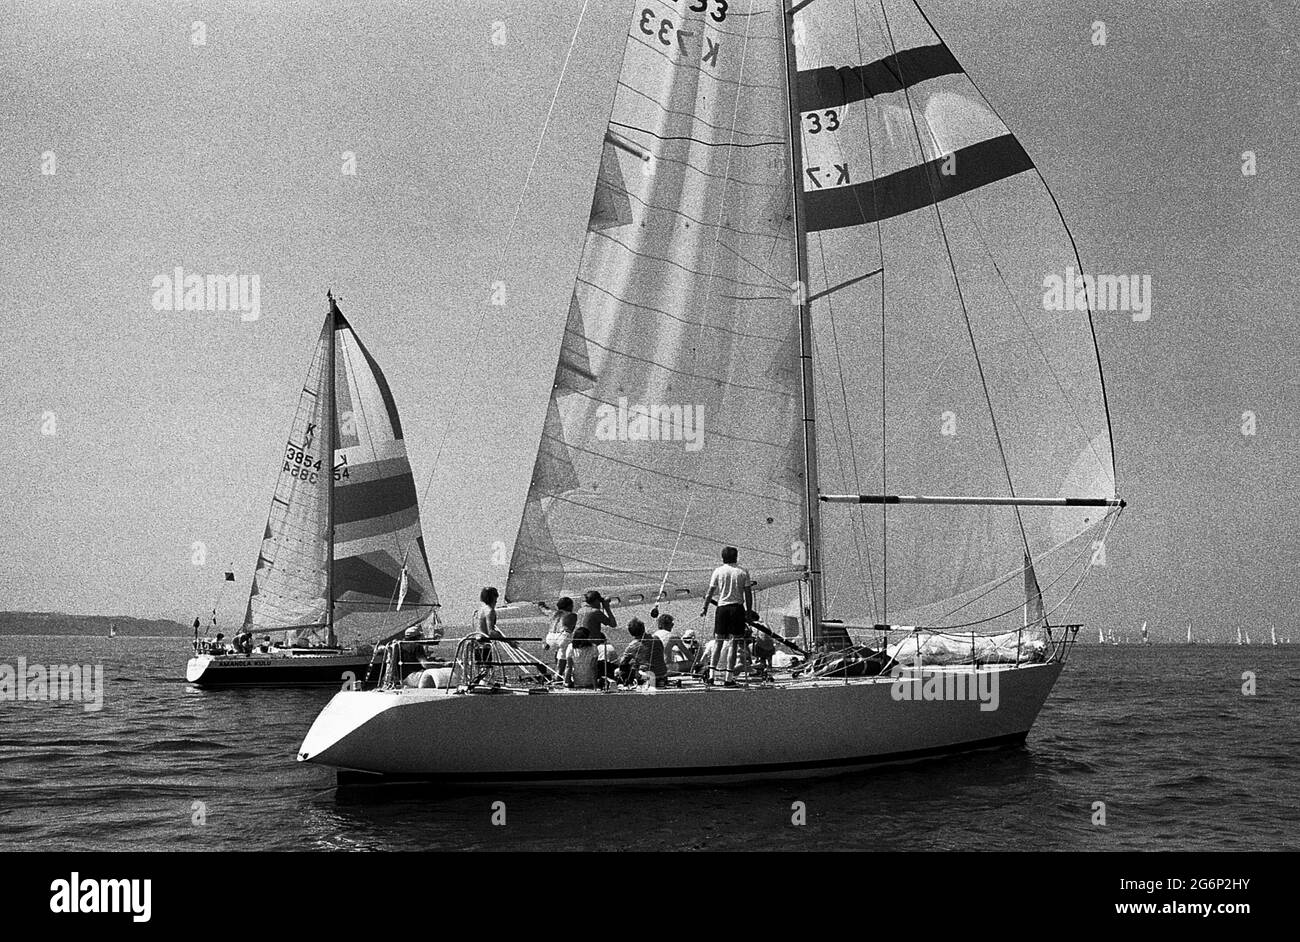 AJAXNETPHOTO. 7TH JULY, 1979. SOLENT, COWES, ENGLAND. - TEAM YACHT - BLIZZARD (GBR) AT THE START OF THE COWES-DINARD OFFSHORE RACE. YACHT WAS A GB ADMIRAL'S CUP TEAM YACHT IN THE SAME YEAR. PHOTO:JONATHAN EASTLAND/AJAX REF:2790707 32 8 Stock Photo